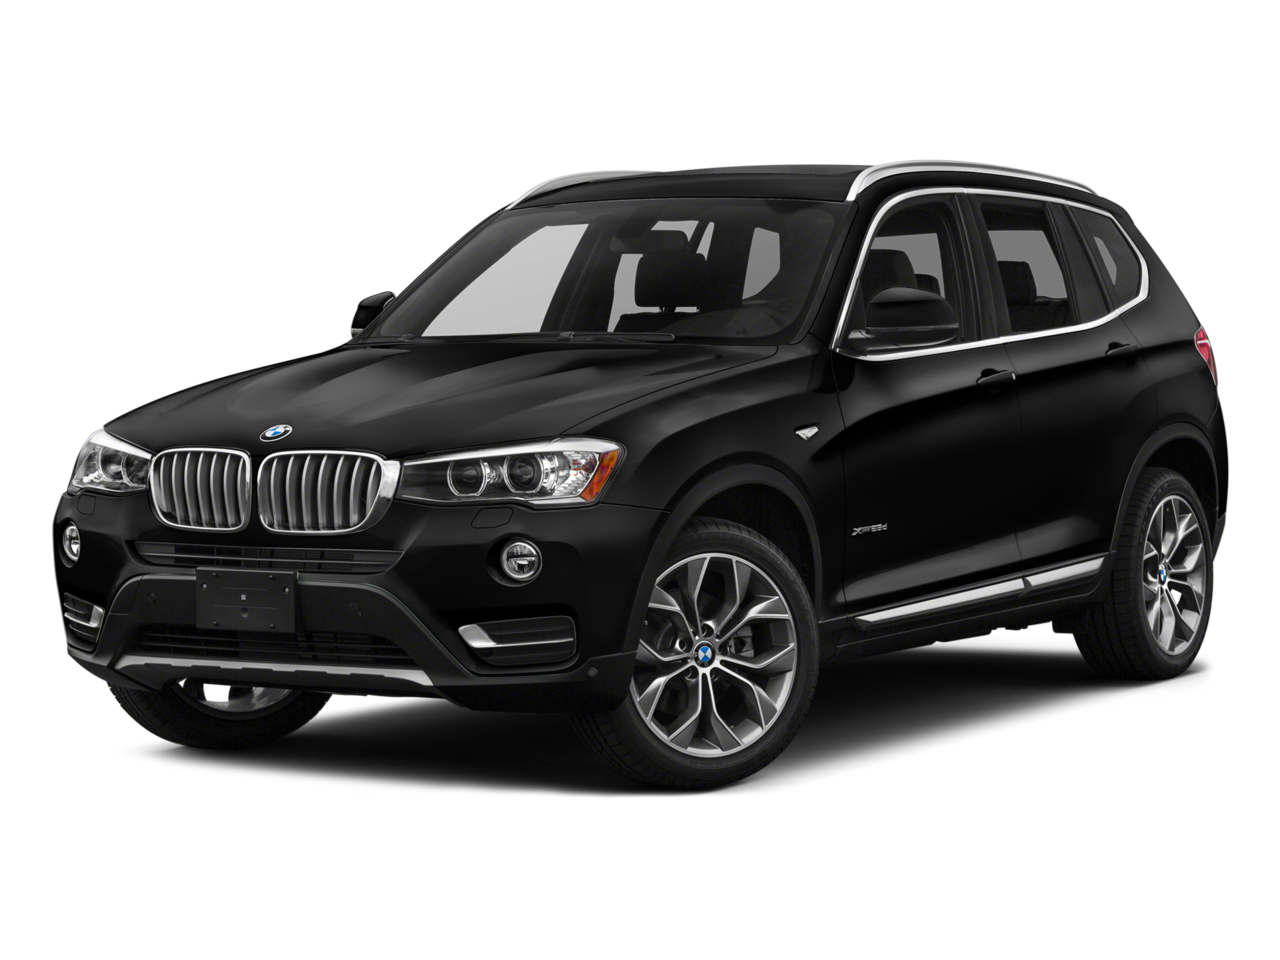 2017 BMW X3 Repair: Service and Maintenance Cost